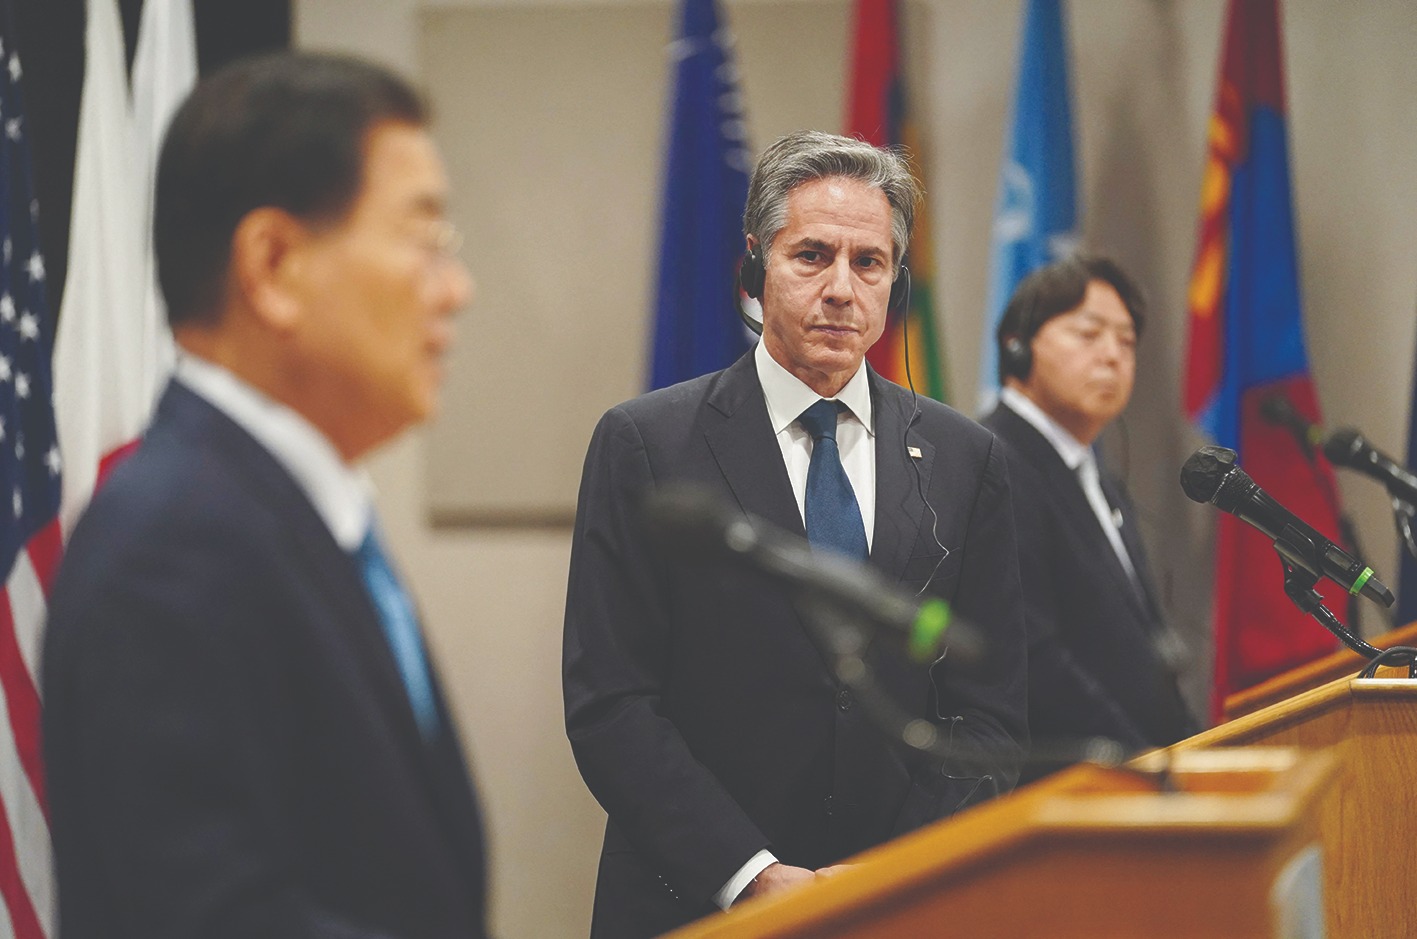 HONOLULU: US Secretary of State Antony Blinken (center) looks towards South Korean Foreign Minister Chung Eui-yong (left) during a joint press availability along Japanese Foreign Minister Yoshimasa Hayashi (right) following their meeting in Honolulu, Hawaii on Saturday.—AFP